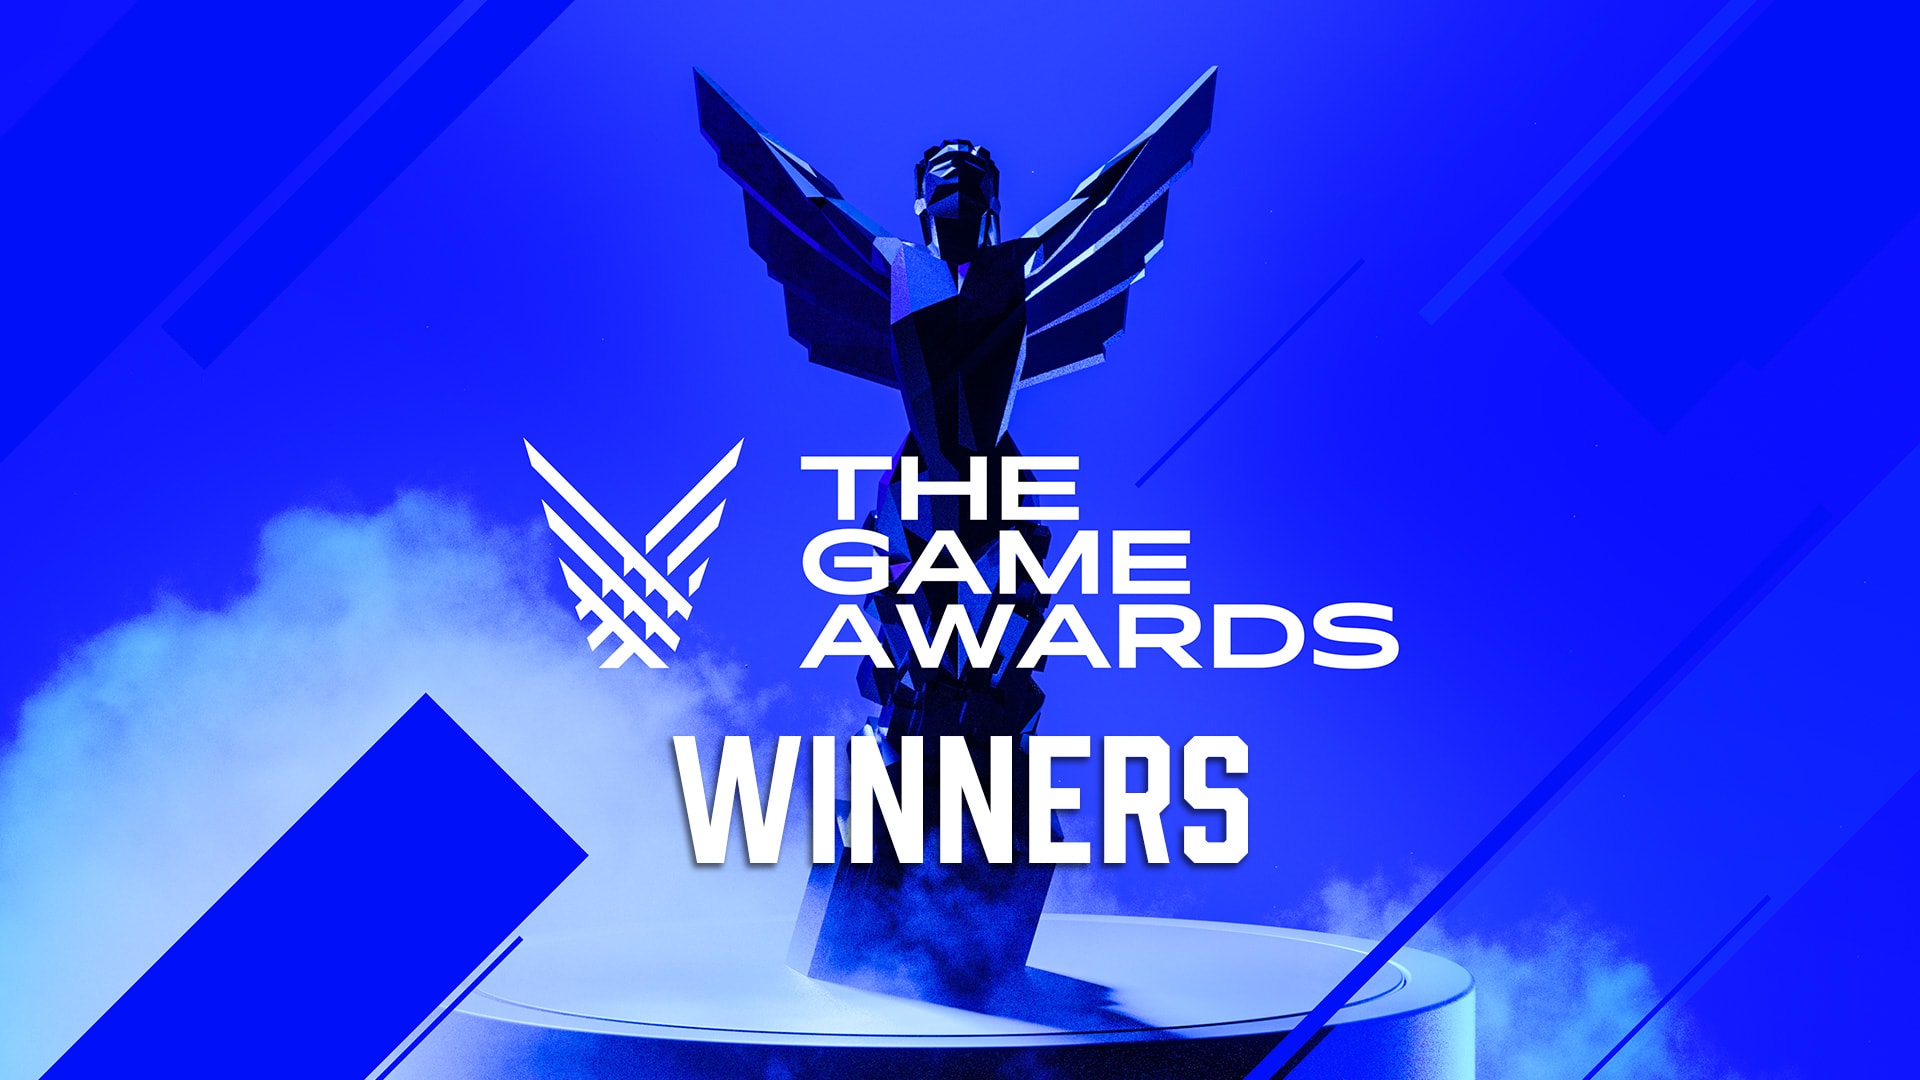 The Game Awards winners 2021 - Nintendo - Official Site